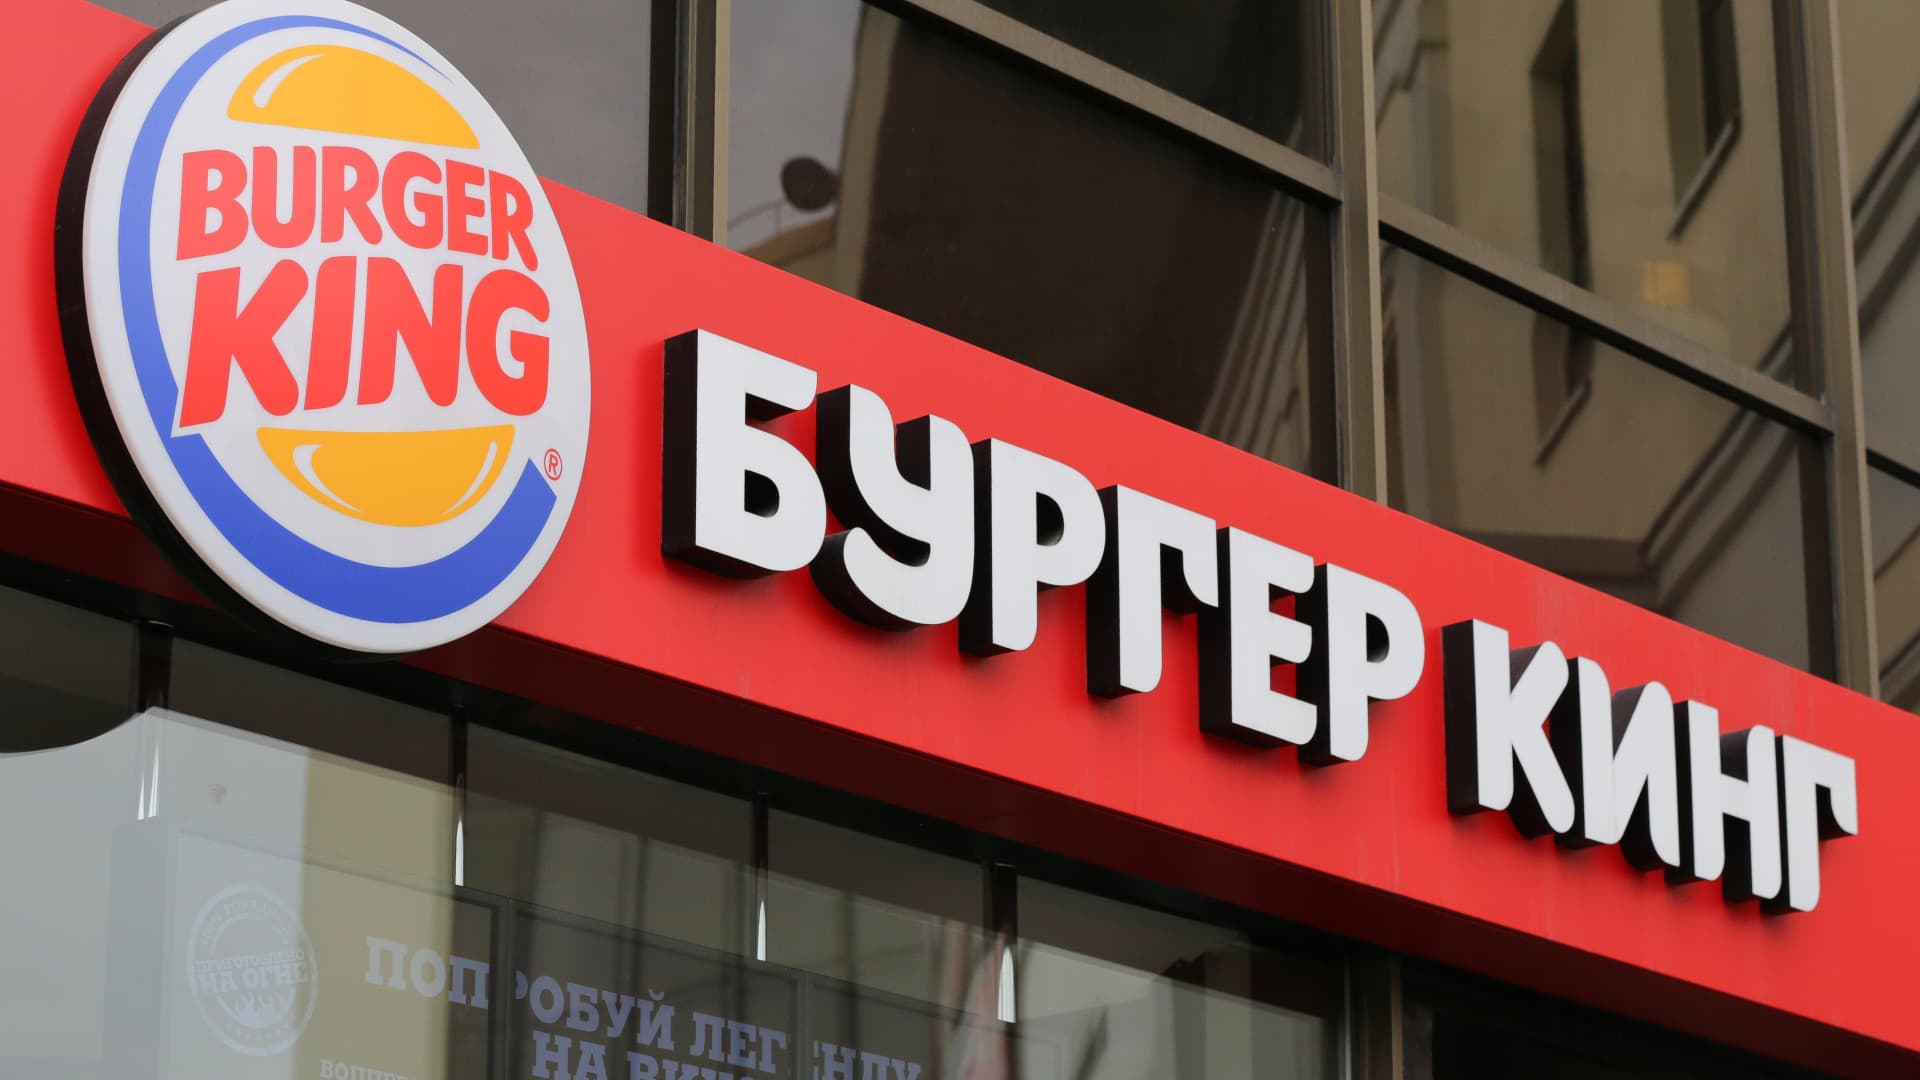 Over 400 companies have withdrawn from Russia. But some Western brands are locked in – CNBC